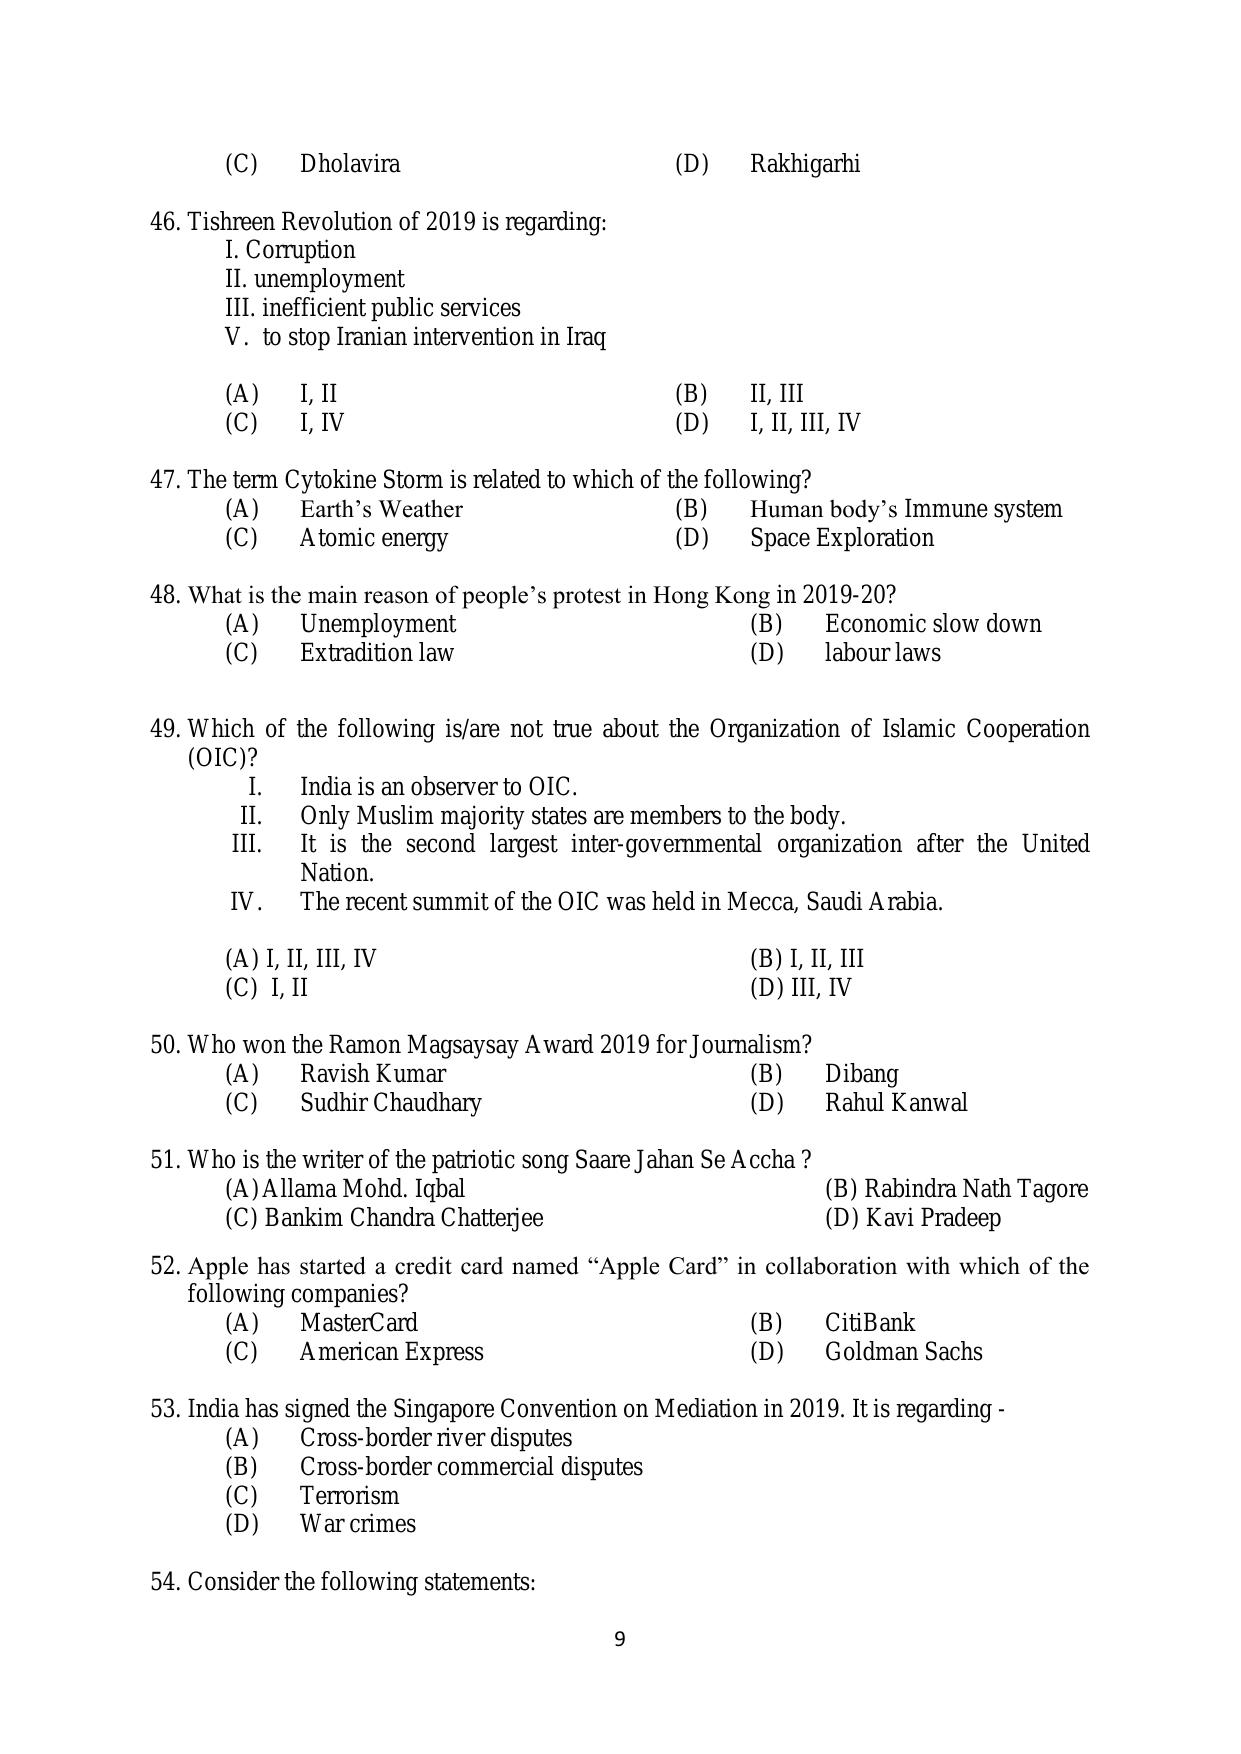 AILET 2020 Question Paper for BA LLB - Page 9